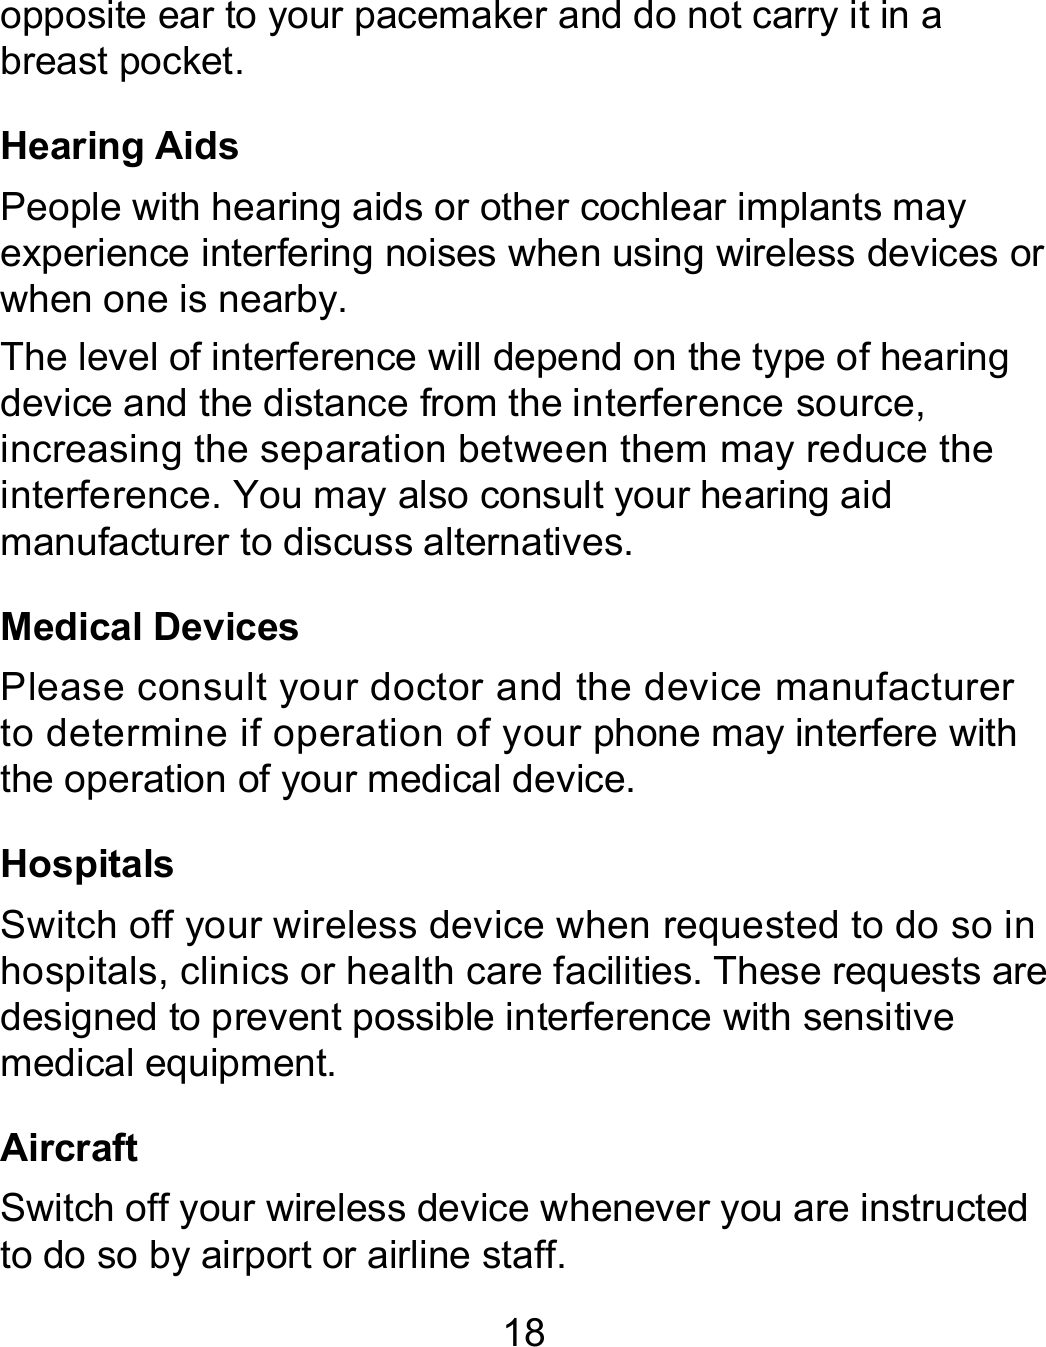 18 opposite ear to your pacemaker and do not carry it in a breast pocket. Hearing Aids People with hearing aids or other cochlear implants may experience interfering noises when using wireless devices or when one is nearby. The level of interference will depend on the type of hearing device and the distance from the interference source, increasing the separation between them may reduce the interference. You may also consult your hearing aid manufacturer to discuss alternatives. Medical Devices Please consult your doctor and the device manufacturer to determine if operation of your phone may interfere with the operation of your medical device. Hospitals Switch off your wireless device when requested to do so in hospitals, clinics or health care facilities. These requests are designed to prevent possible interference with sensitive medical equipment. Aircraft Switch off your wireless device whenever you are instructed to do so by airport or airline staff. 